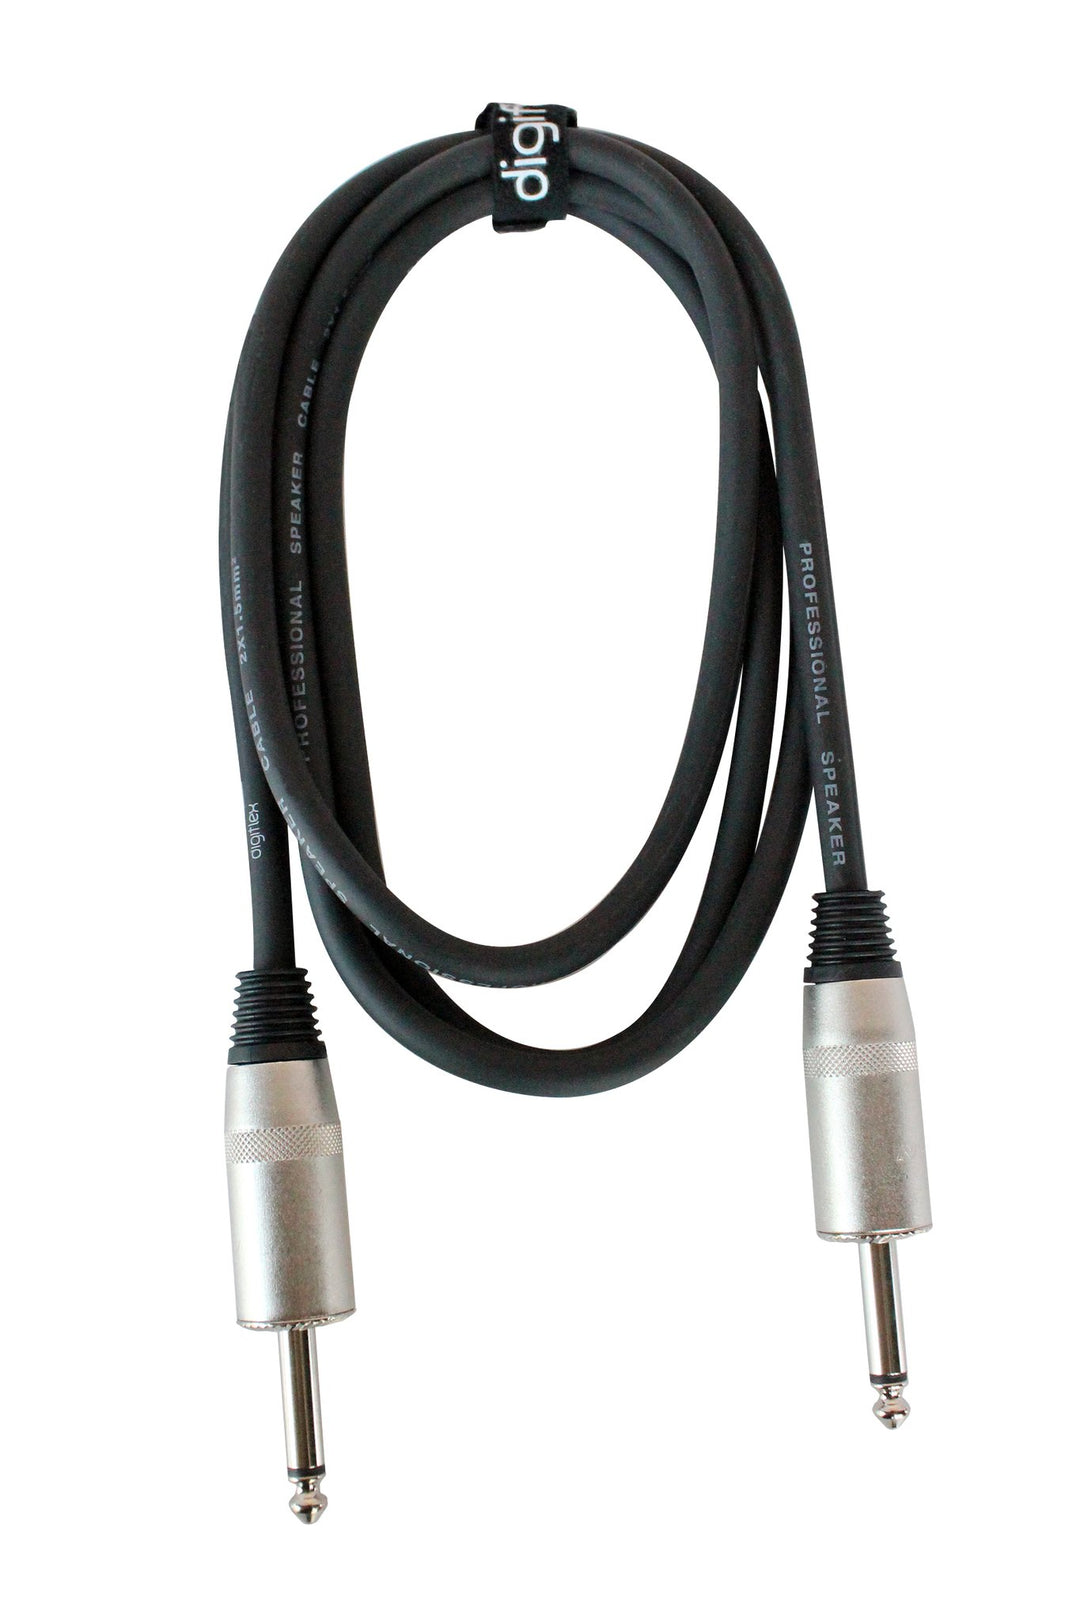 HLSP SFM:1/4" Male TS To1/4" Male TS 13/2 Awg Speaker Cable 25 FT